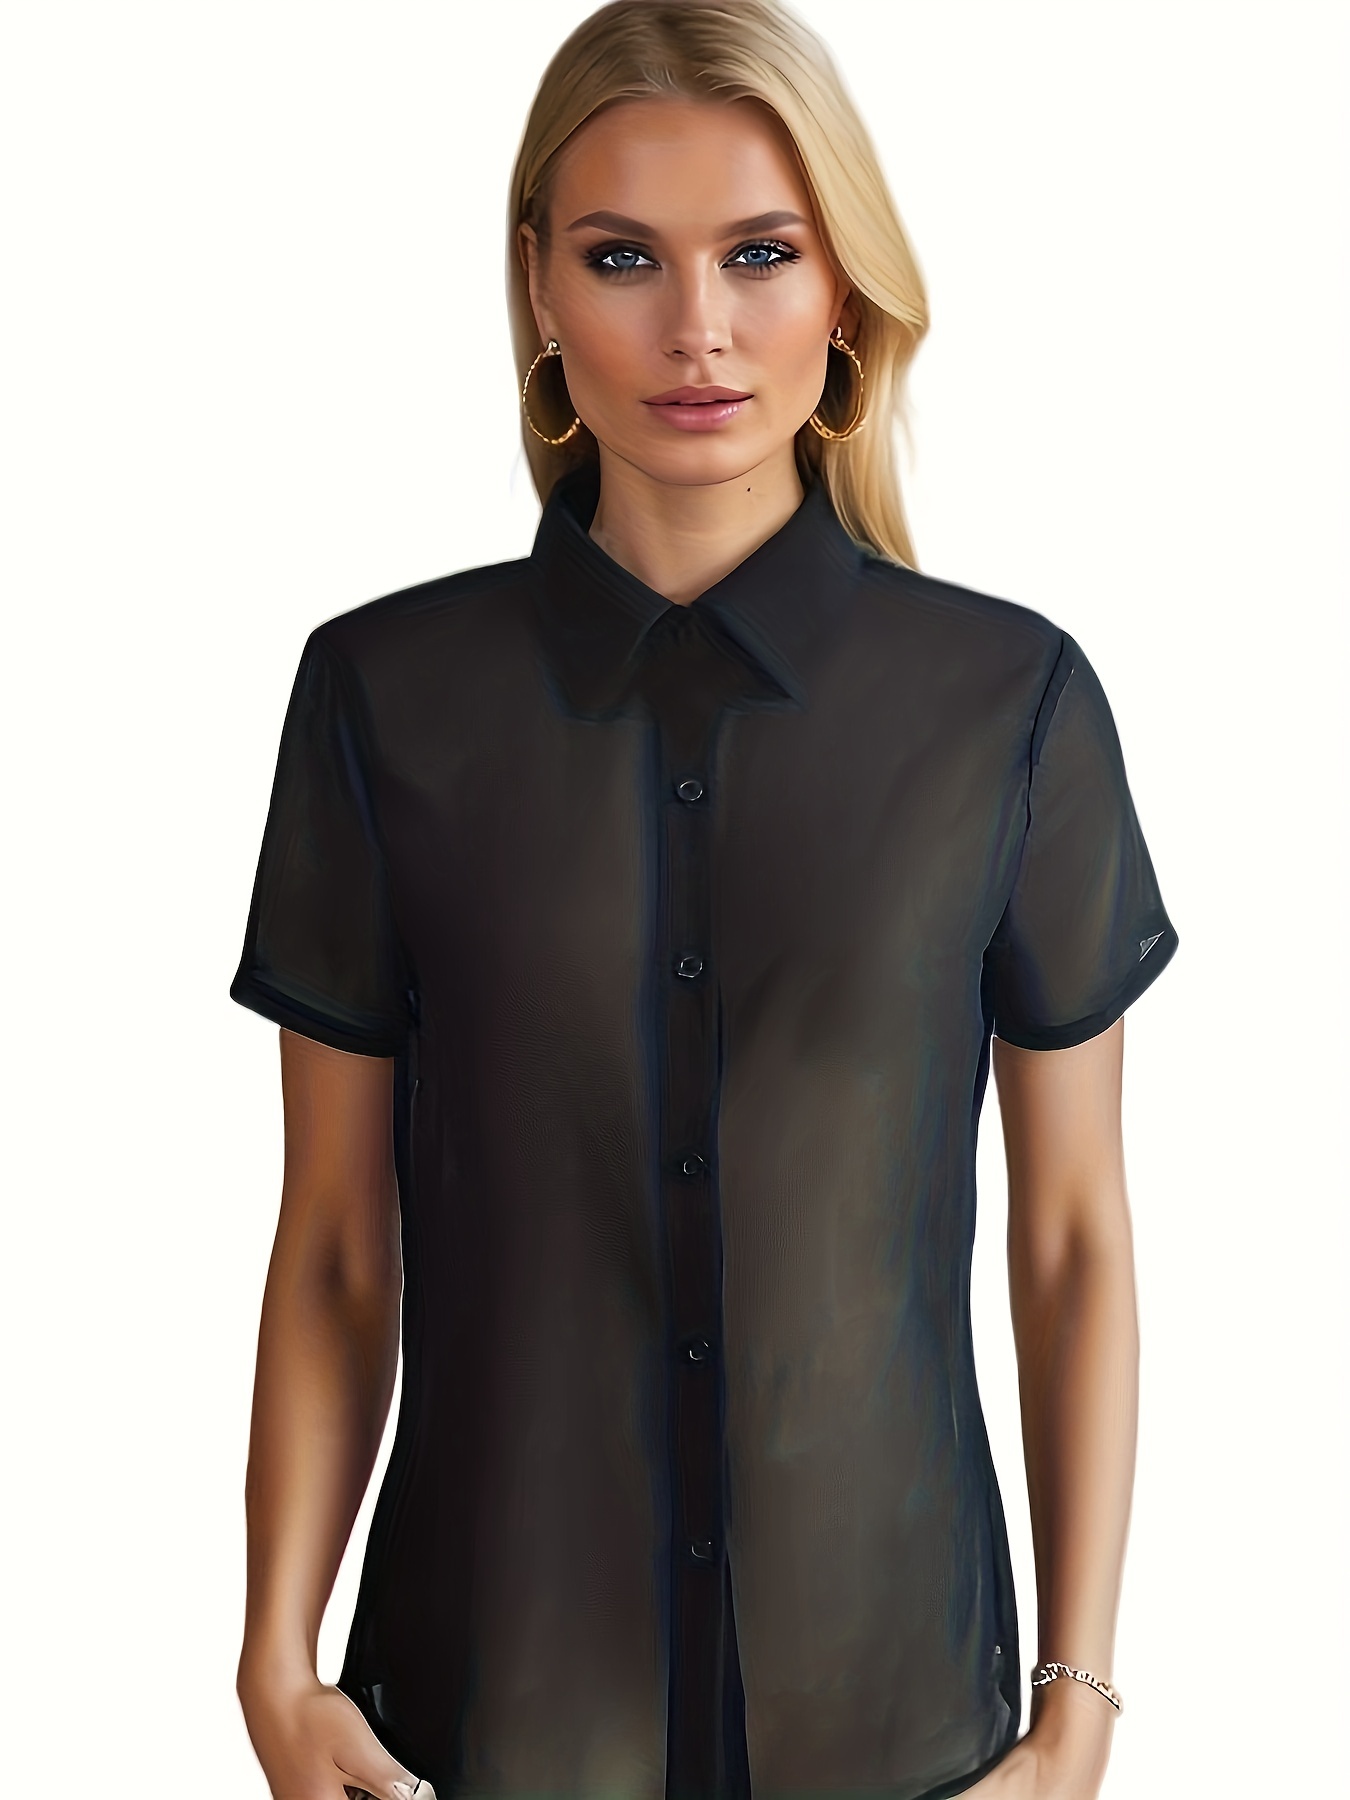  Sexy Tops for Women Dressy Lace Semi Sheer Blouse Scallop V  Neck Slim Fit Shirt Short Sleeve Plus Size Summer Tops Black : Sports &  Outdoors